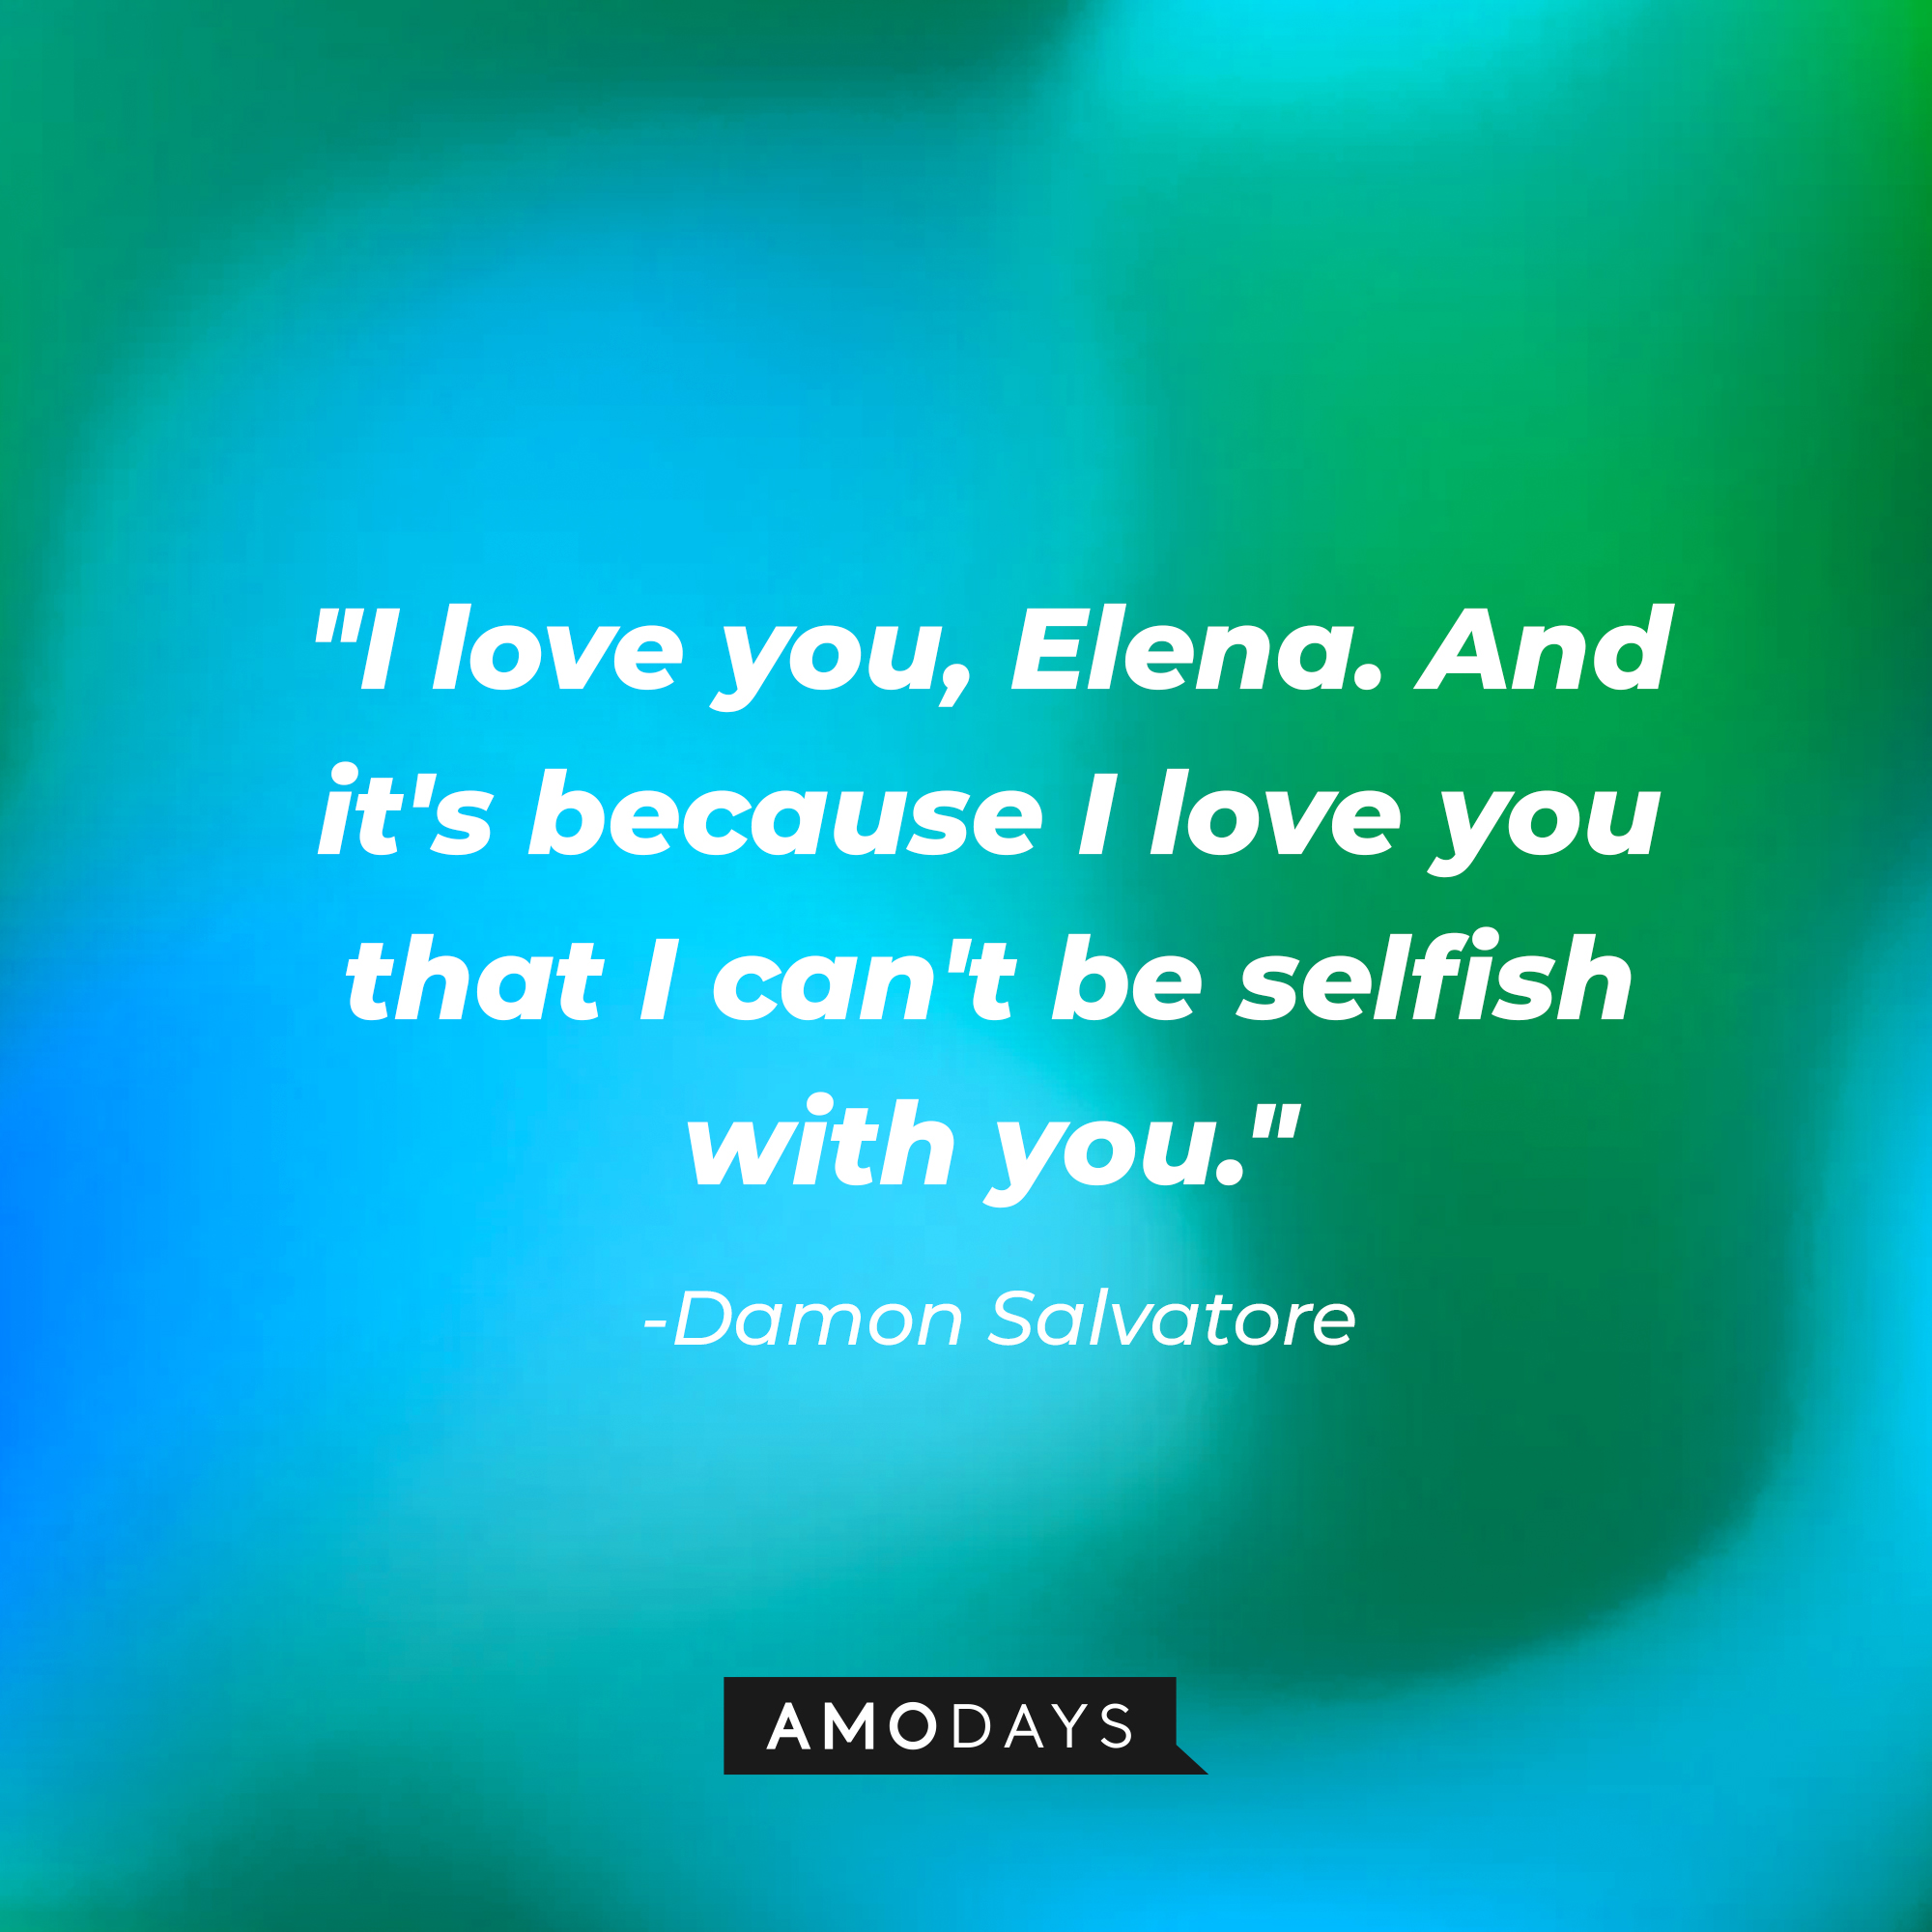 Damon Salvatore's quote: "I love you, Elena. And it's because I love you that I can't be selfish with you." | Source: AmoDays